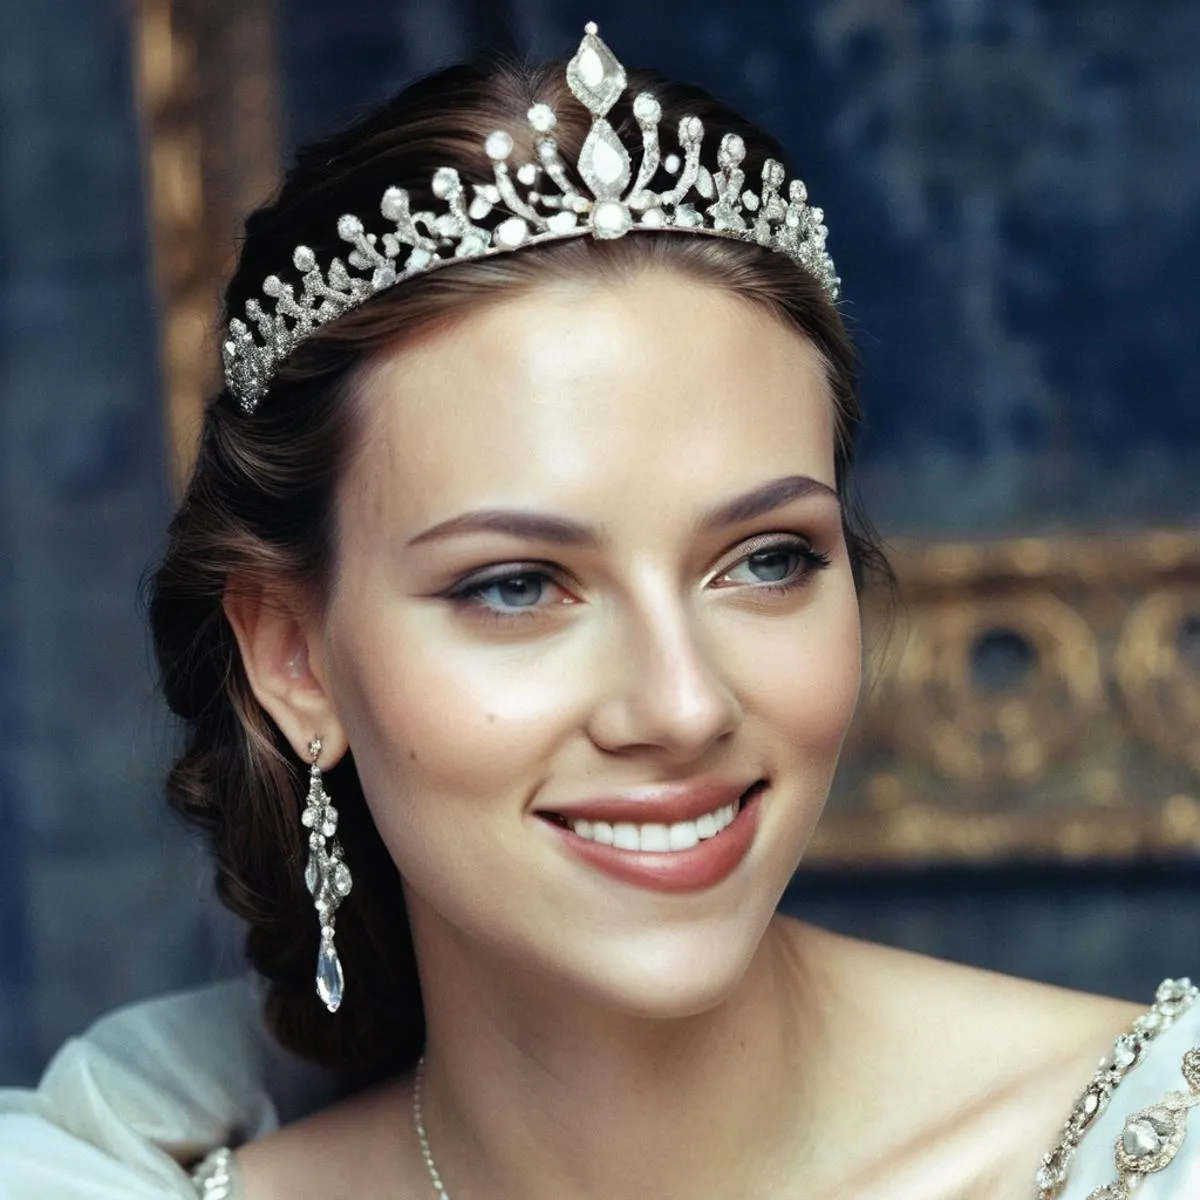 Portrait of a smiling woman wearing a detailed tiara, created using stable diffusion AI.